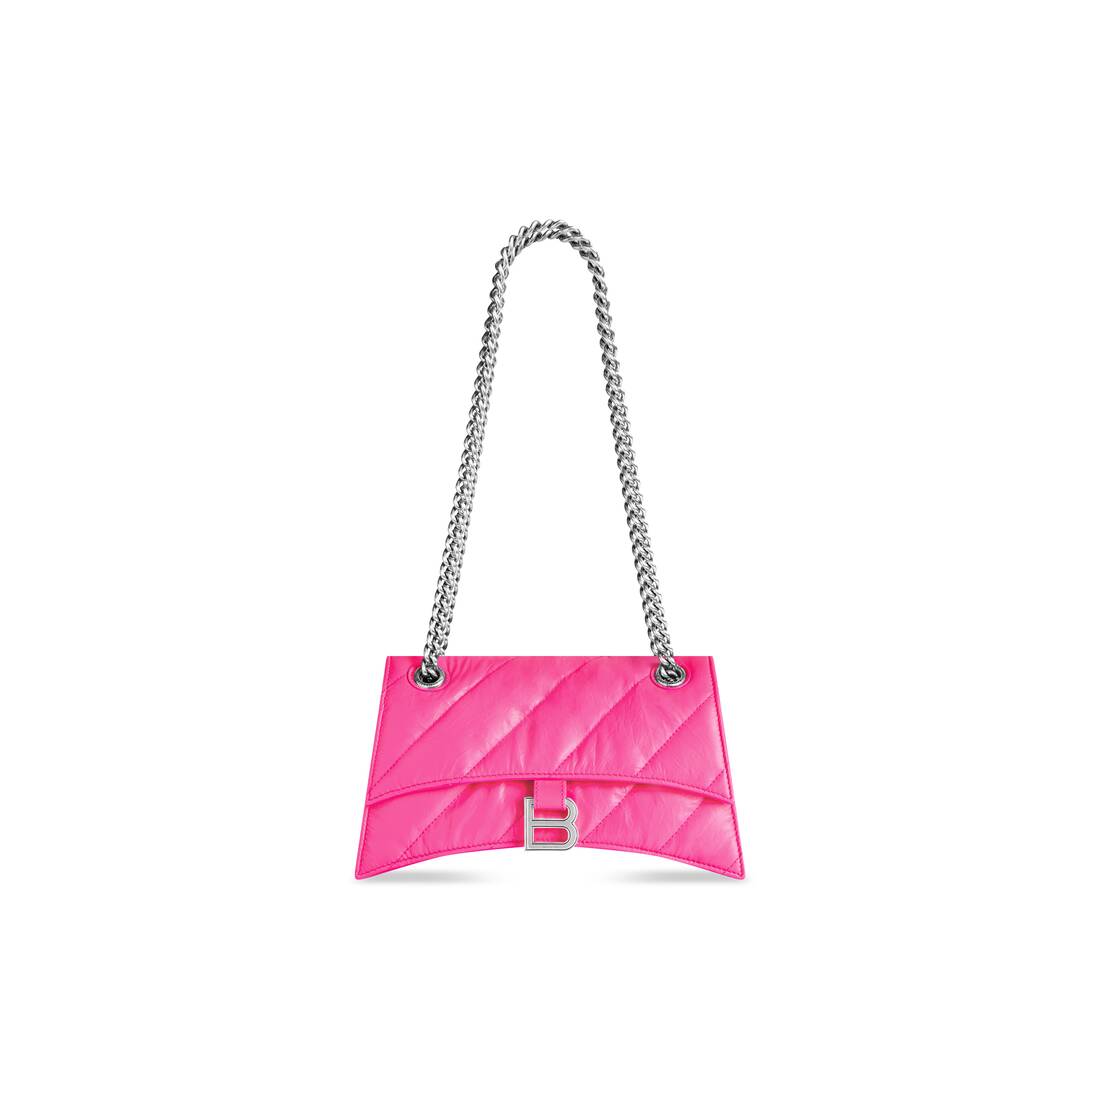 Crush Small Quilted Leather Shoulder Bag in Pink - Balenciaga